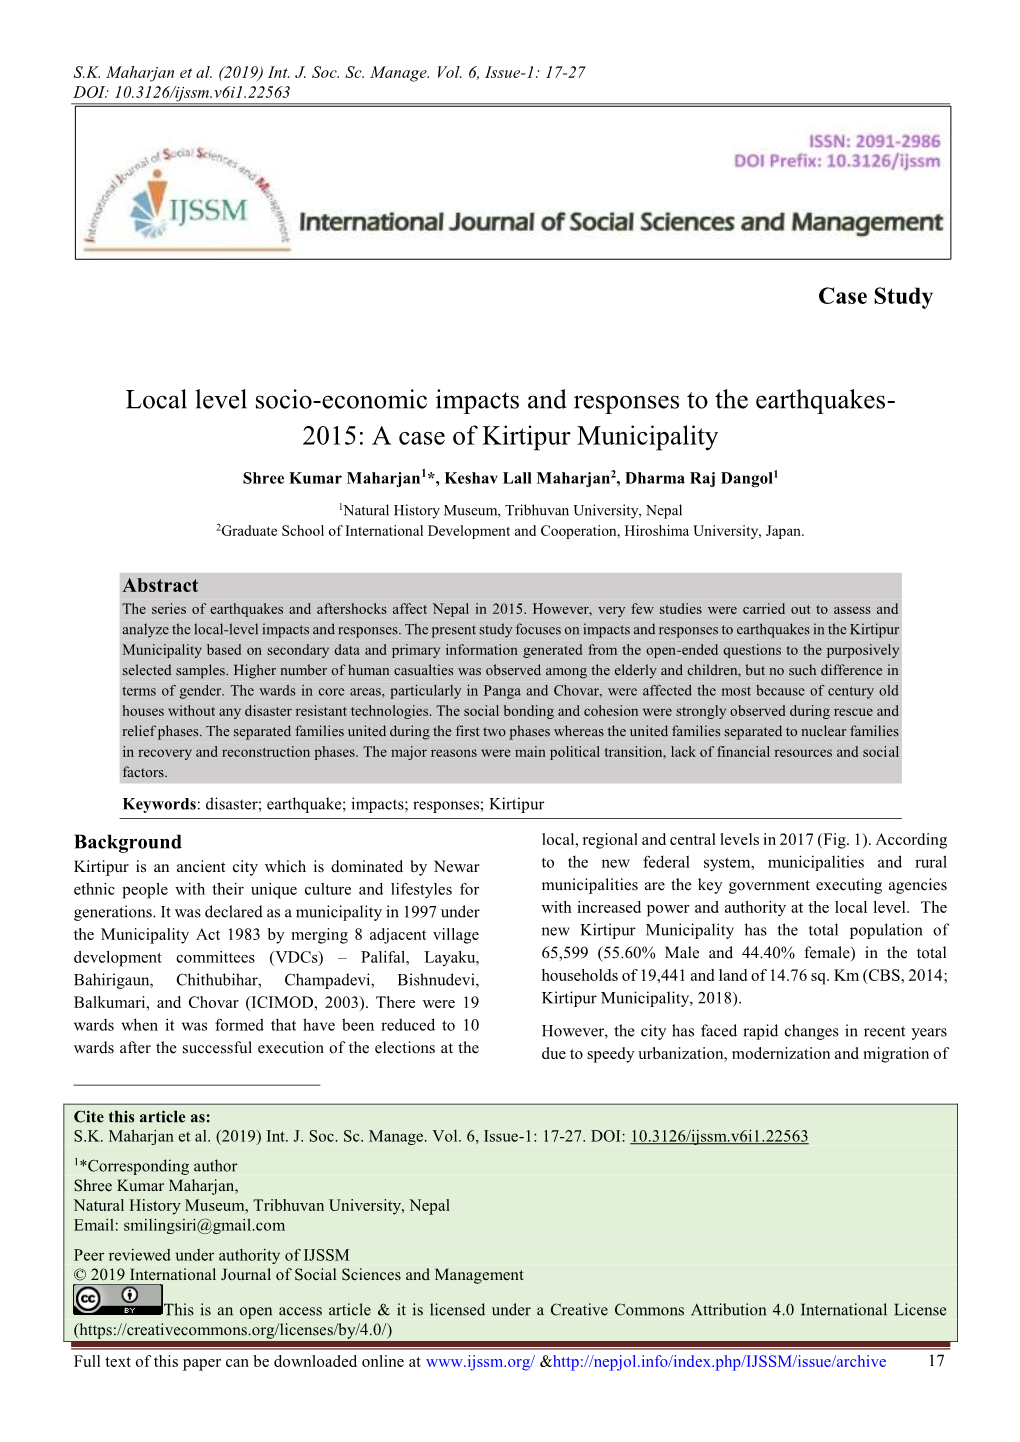 Local Level Socio-Economic Impacts and Responses to the Earthquakes- 2015: a Case of Kirtipur Municipality